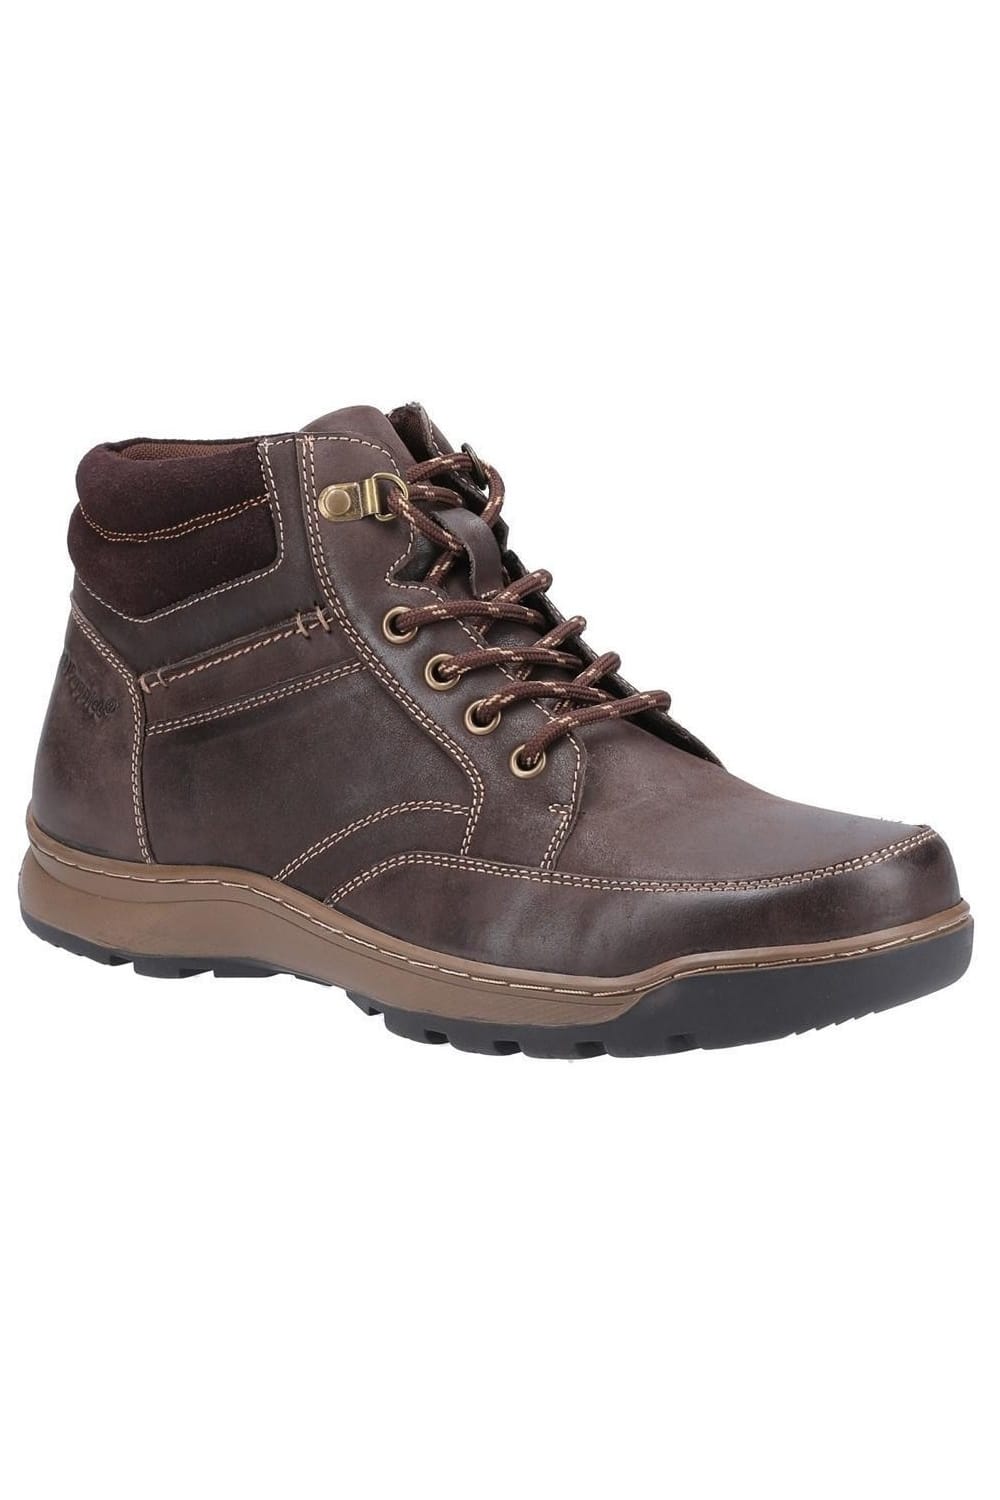 Mens Grover Leather Boots - Brown